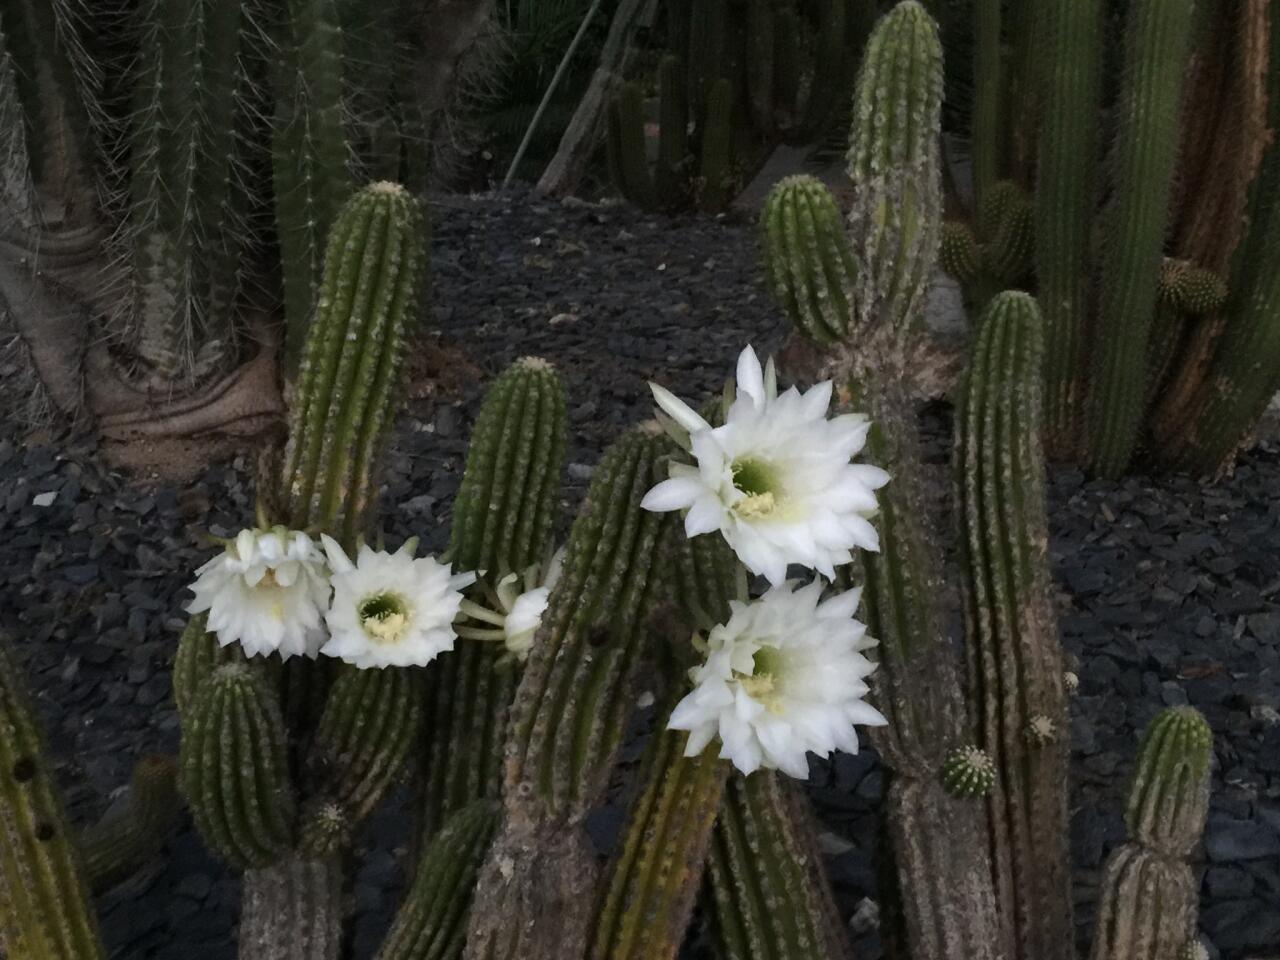 An inhabitant of the cactus garden blooms as if on cue for the annual Lotusland fundraiser in Montecito, Calif.